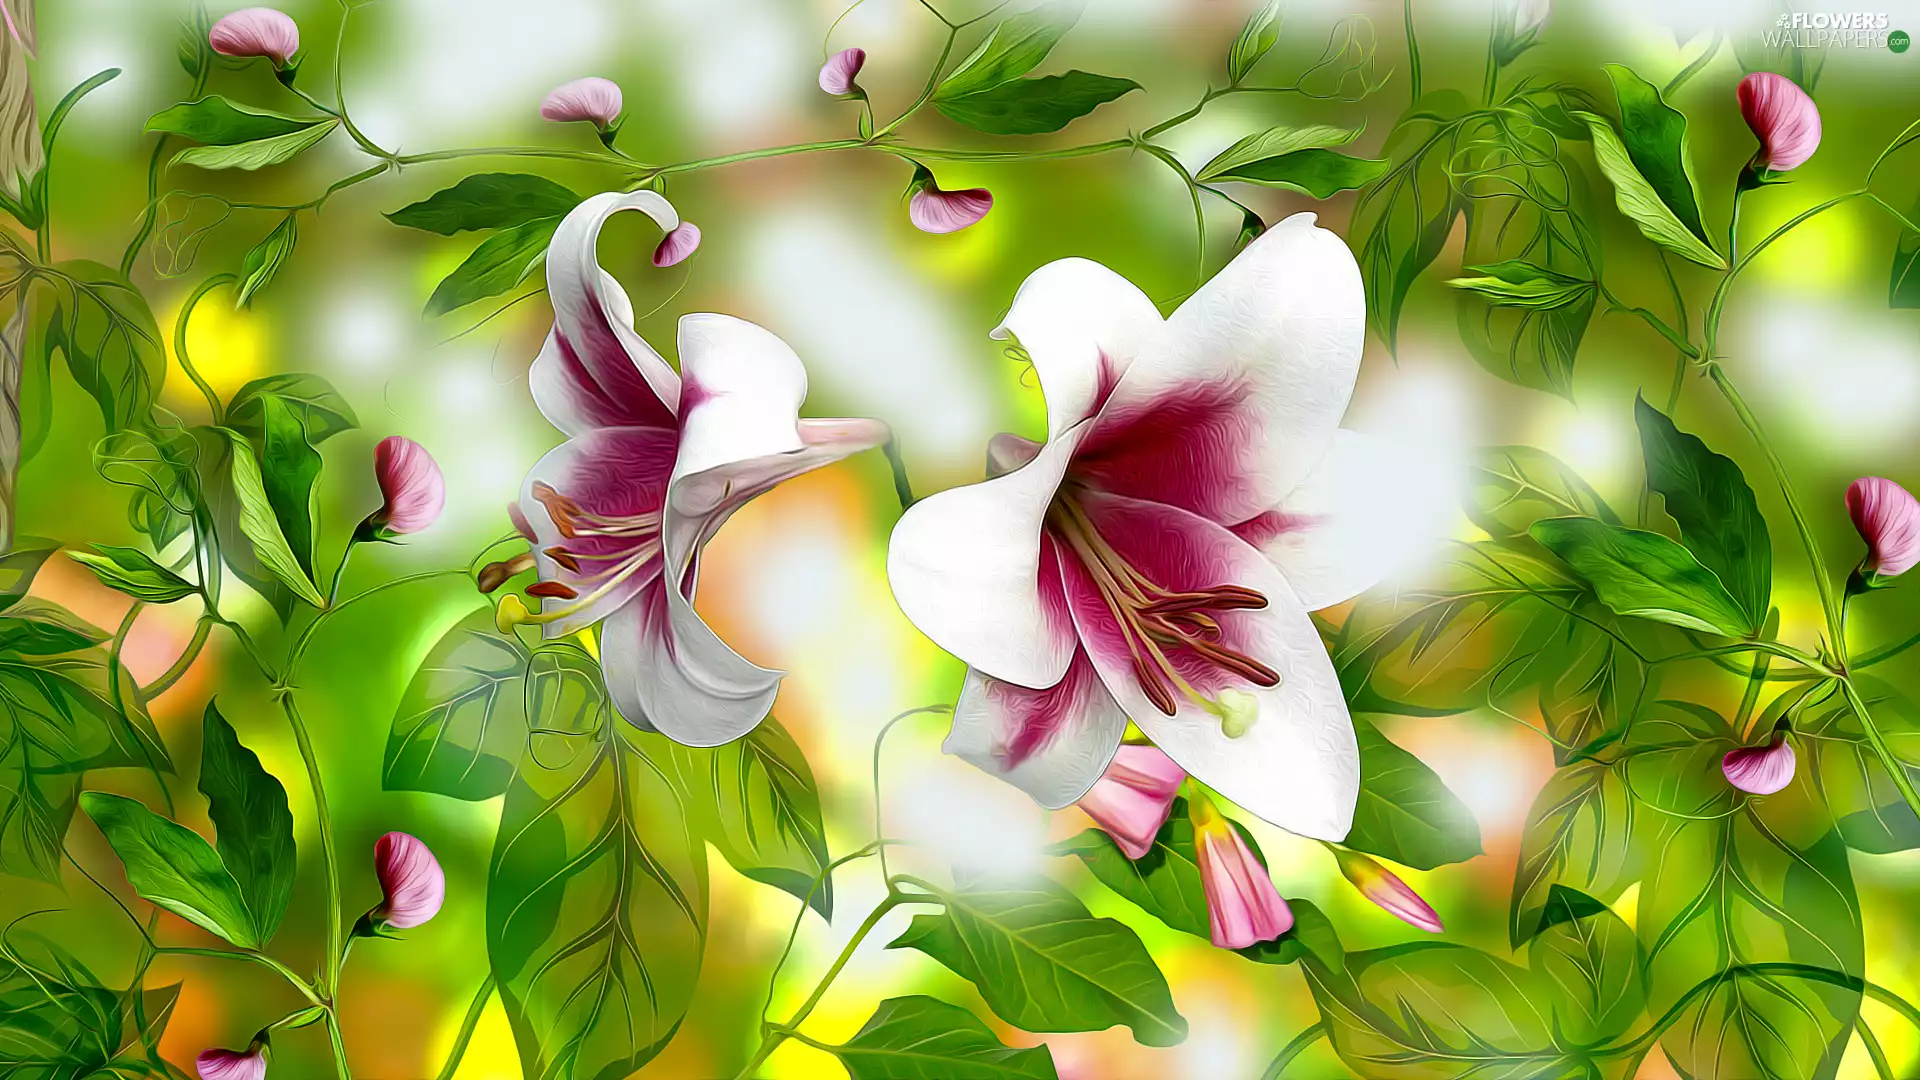 Flowers, Fragrant Peas, graphics, lilies